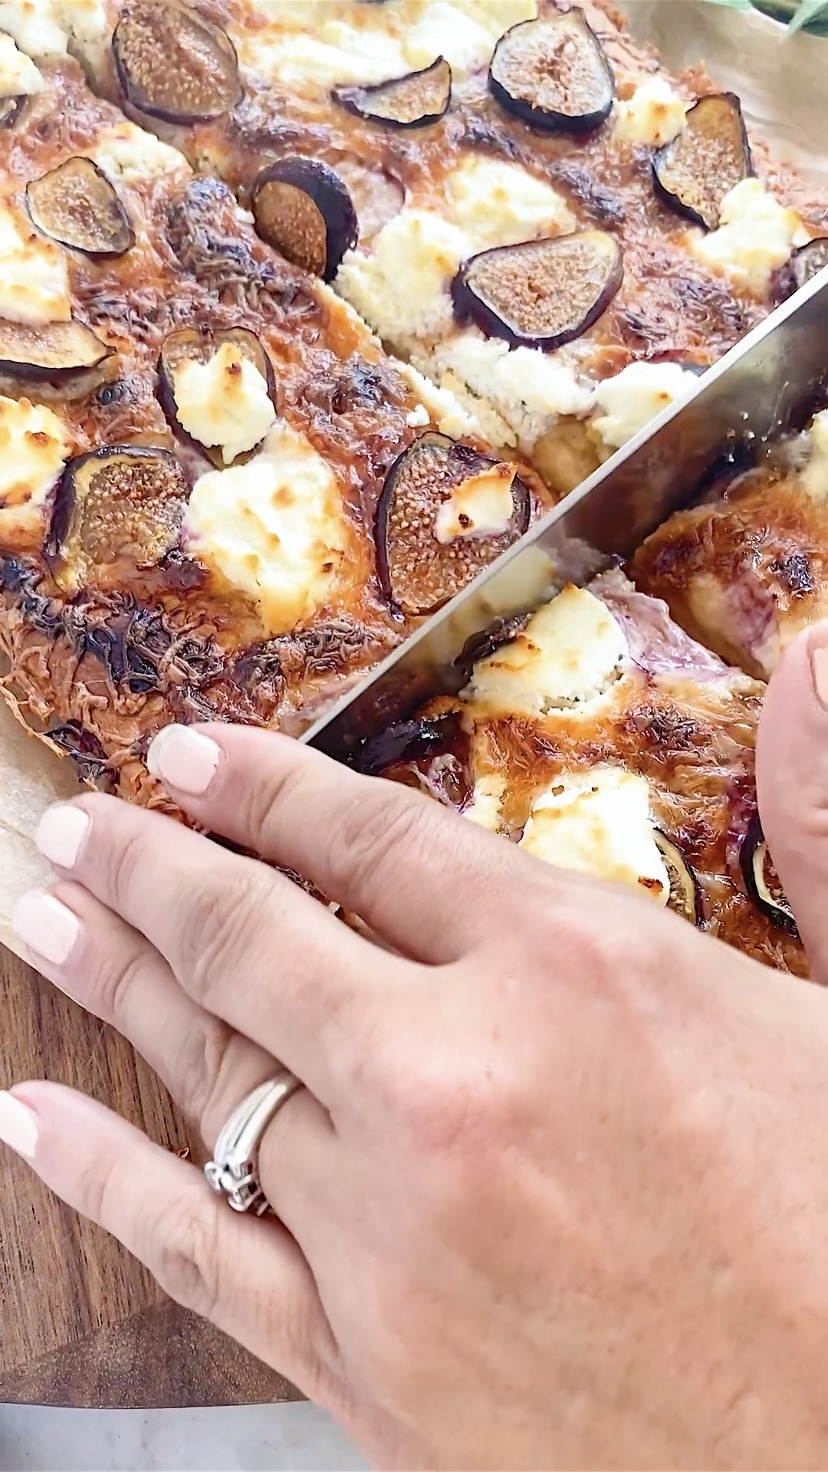 Cutting a pizza with figs and goat cheese.